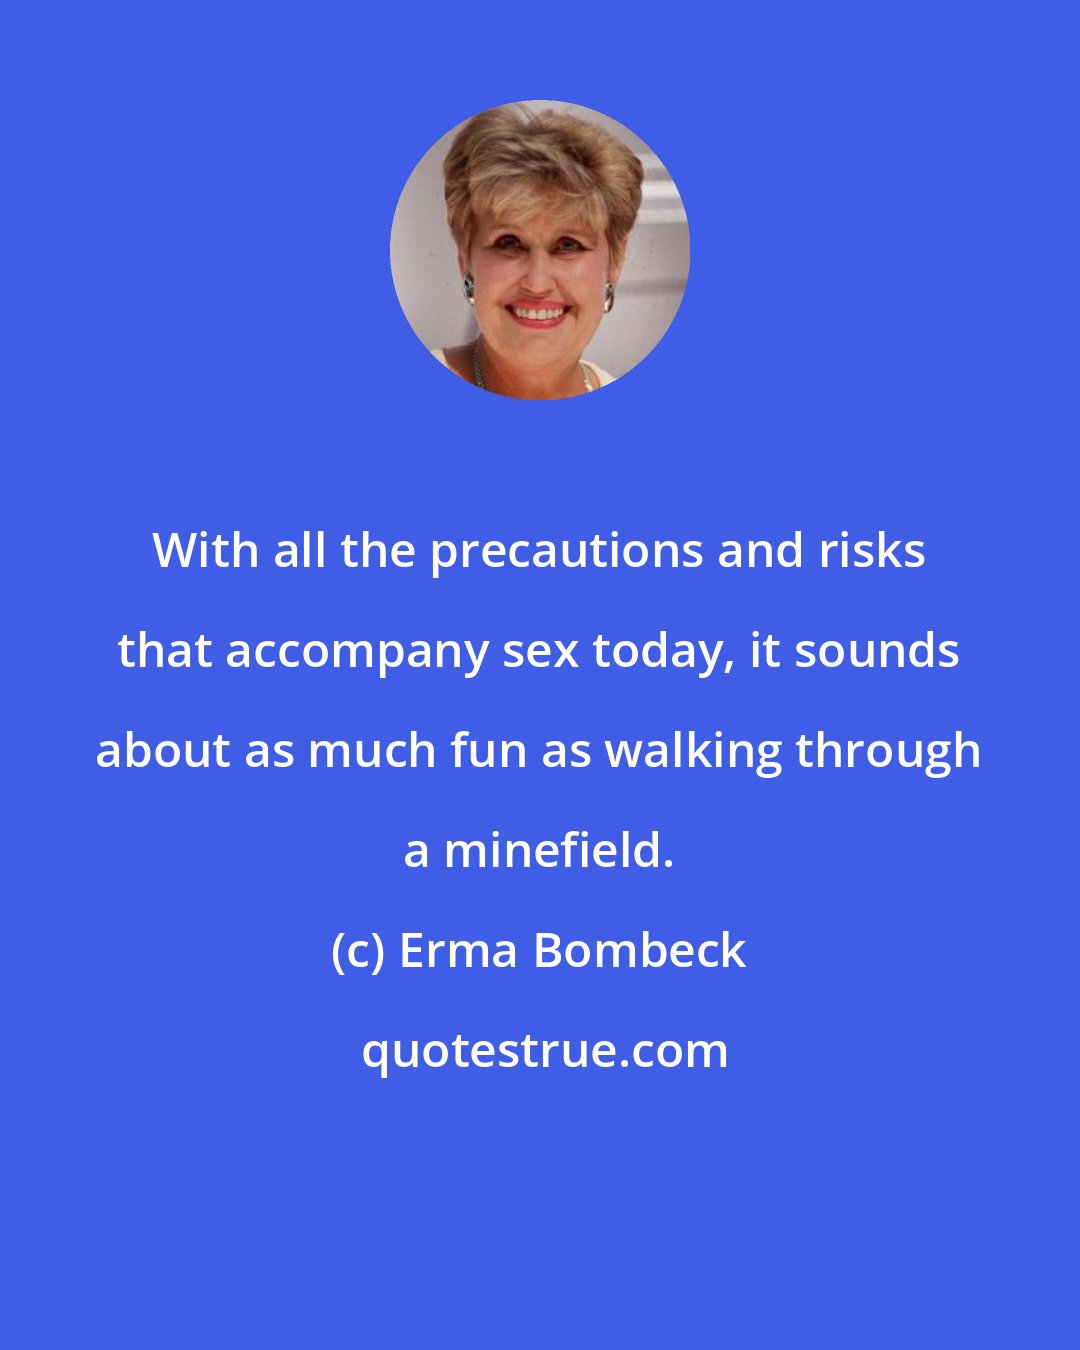 Erma Bombeck: With all the precautions and risks that accompany sex today, it sounds about as much fun as walking through a minefield.